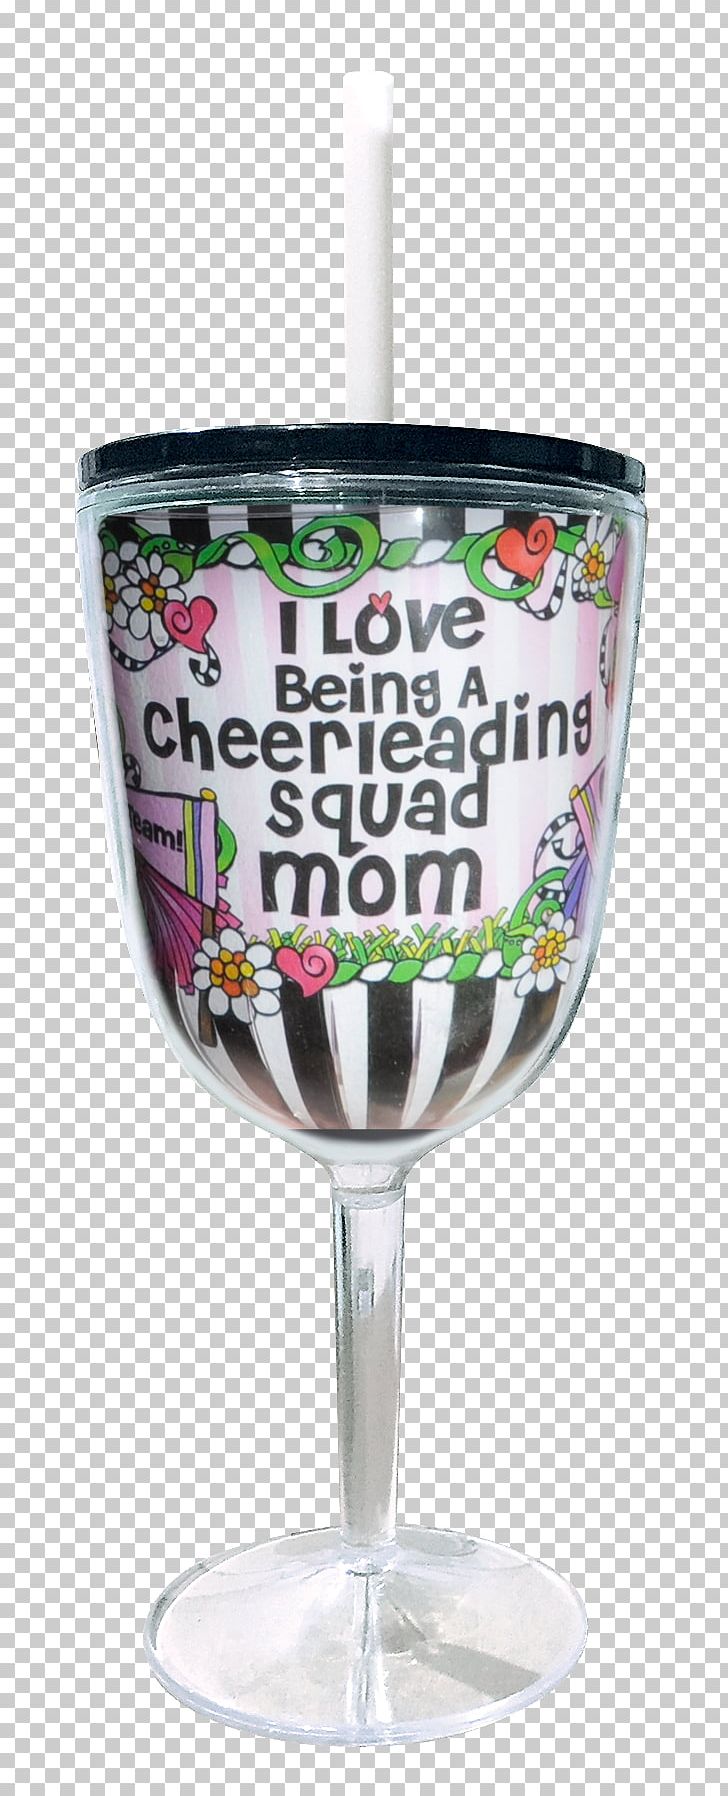 Wine Glass Champagne Glass Drink Mug PNG, Clipart, Champagne Glass, Champagne Stemware, Cheer Squad, Drink, Drinkware Free PNG Download